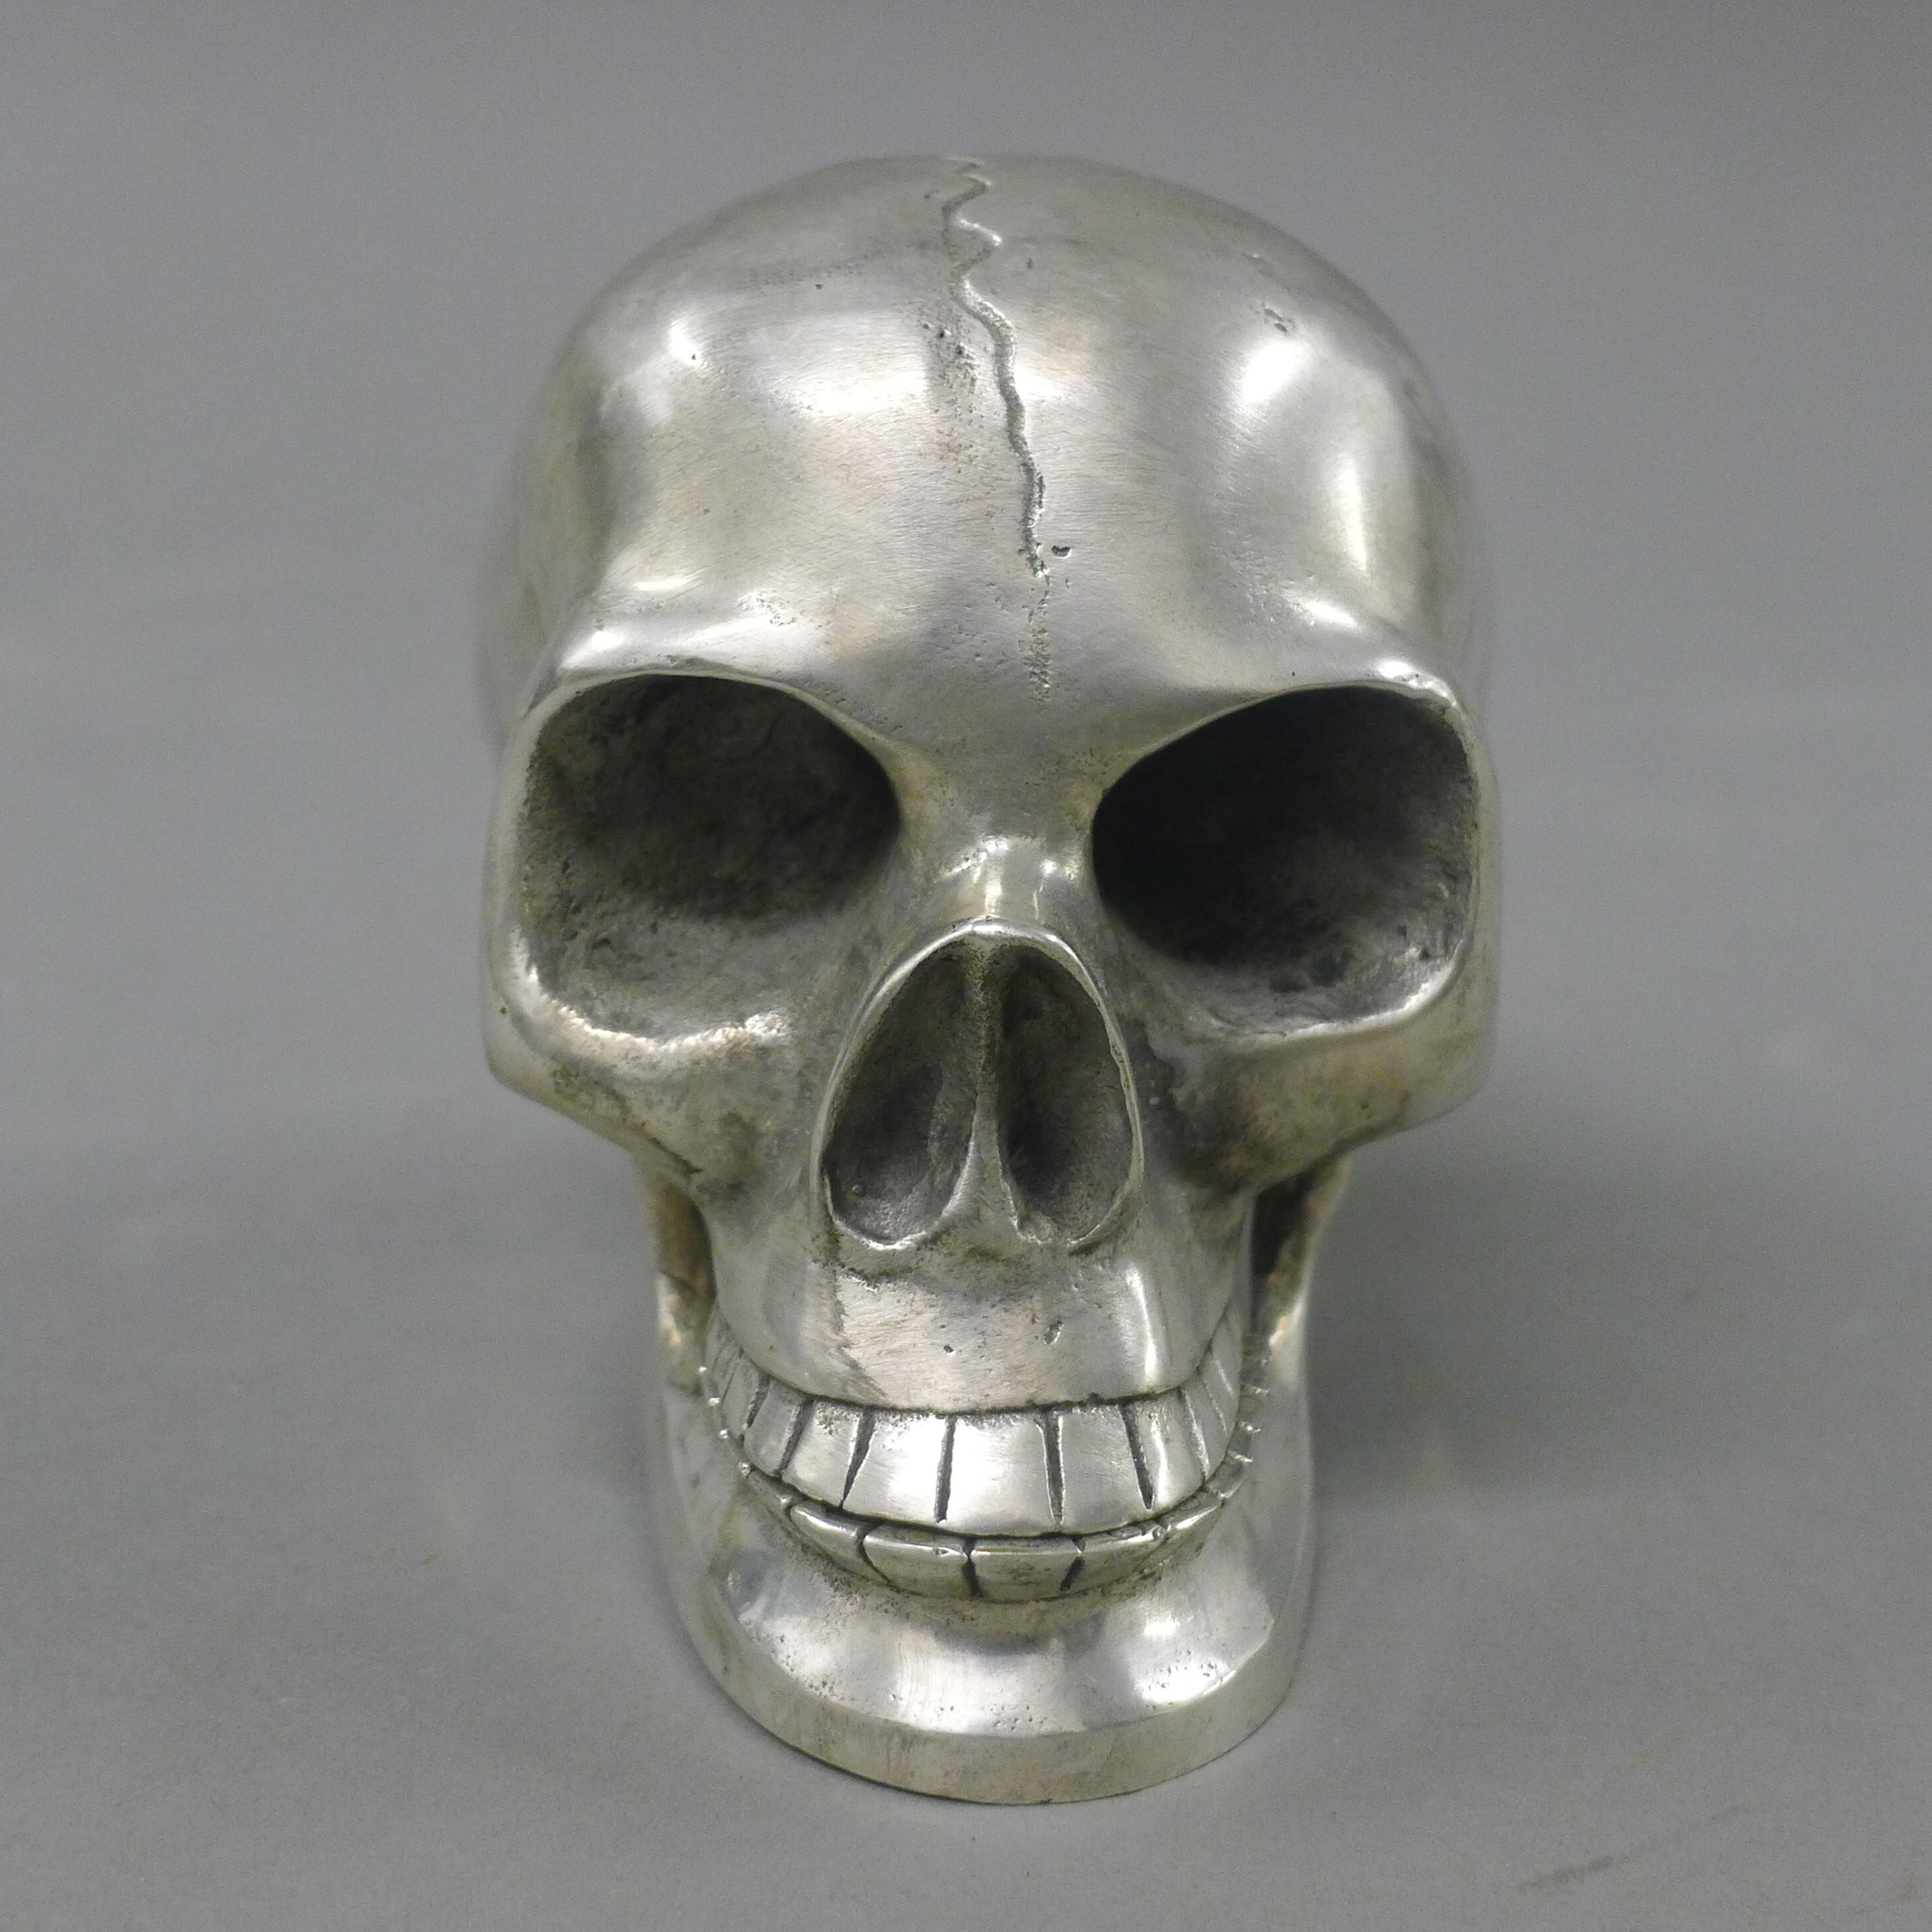 A silver plated model skull. 9 cm high. - Image 2 of 2